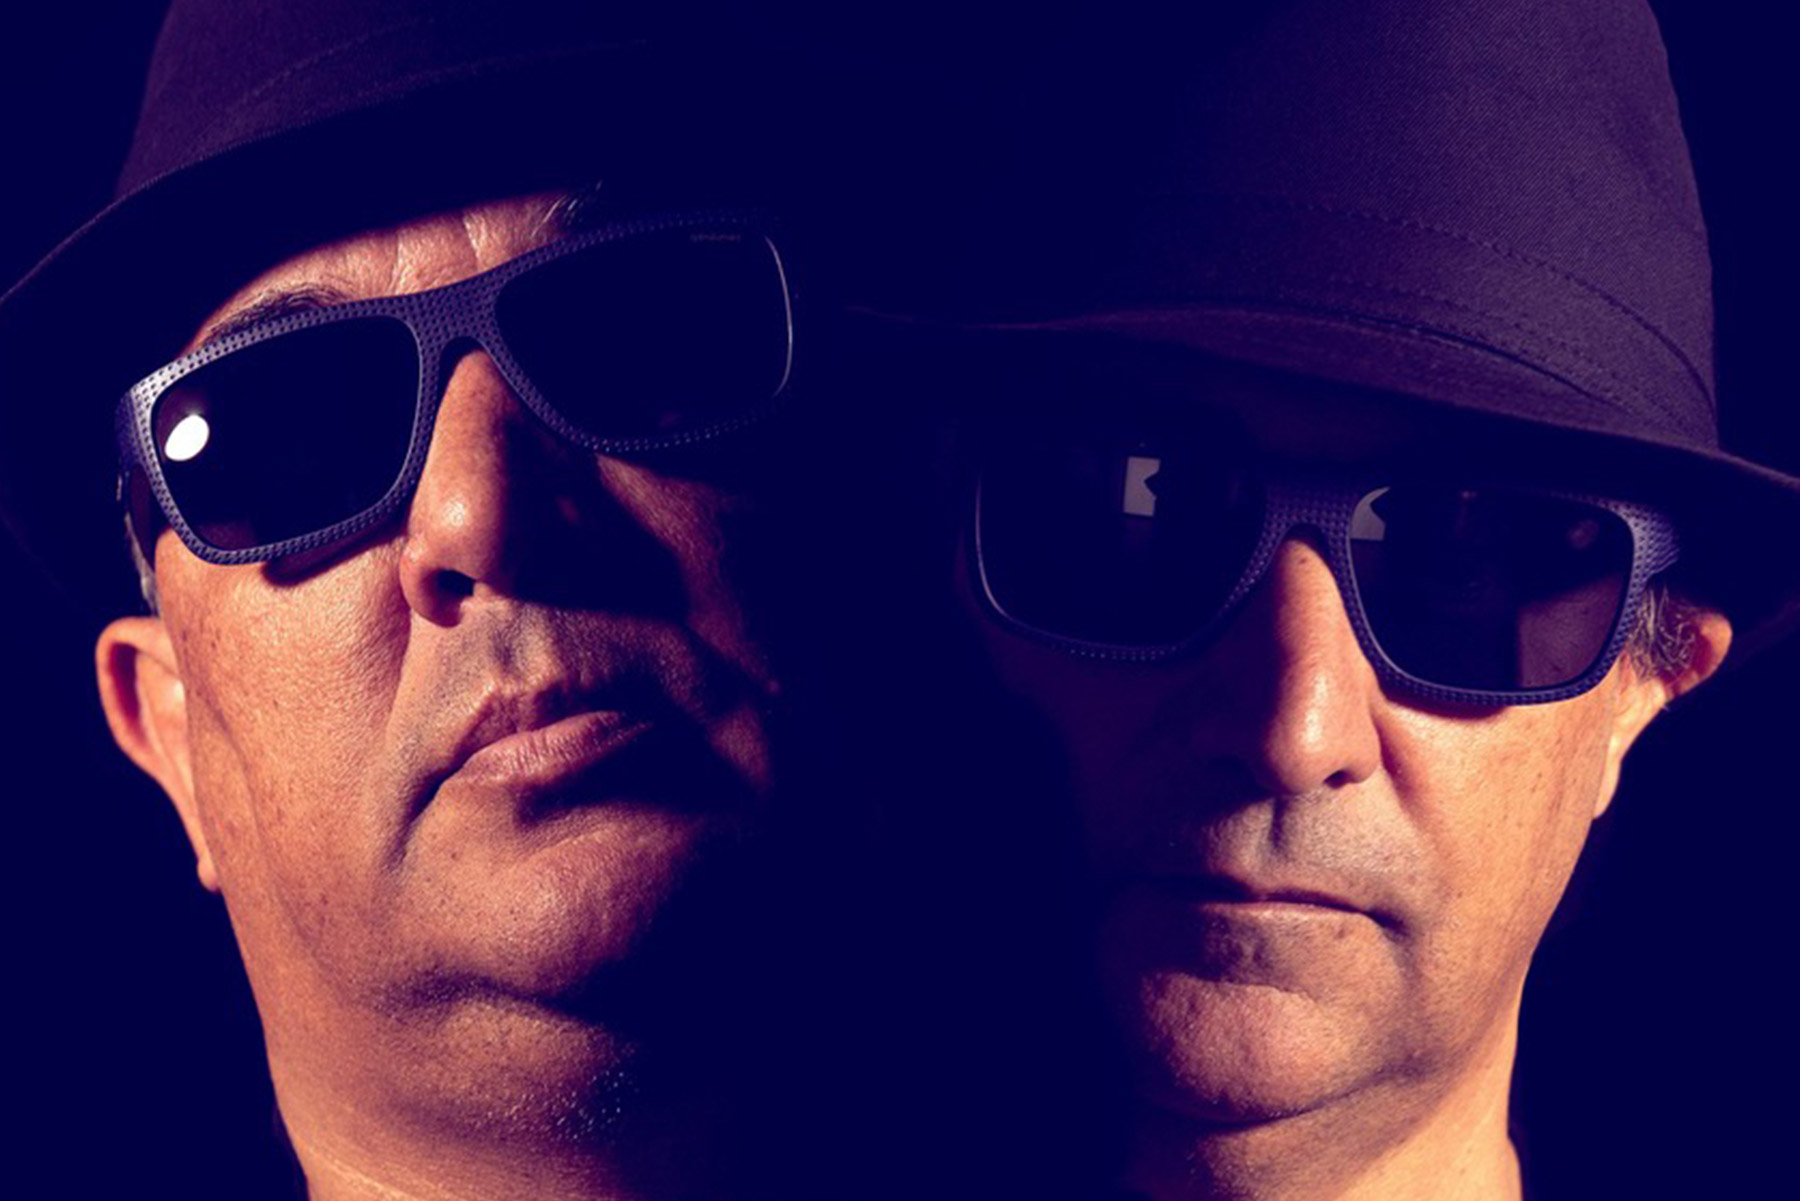 Bubba Brothers confirm show at Amsterdam Dance Event